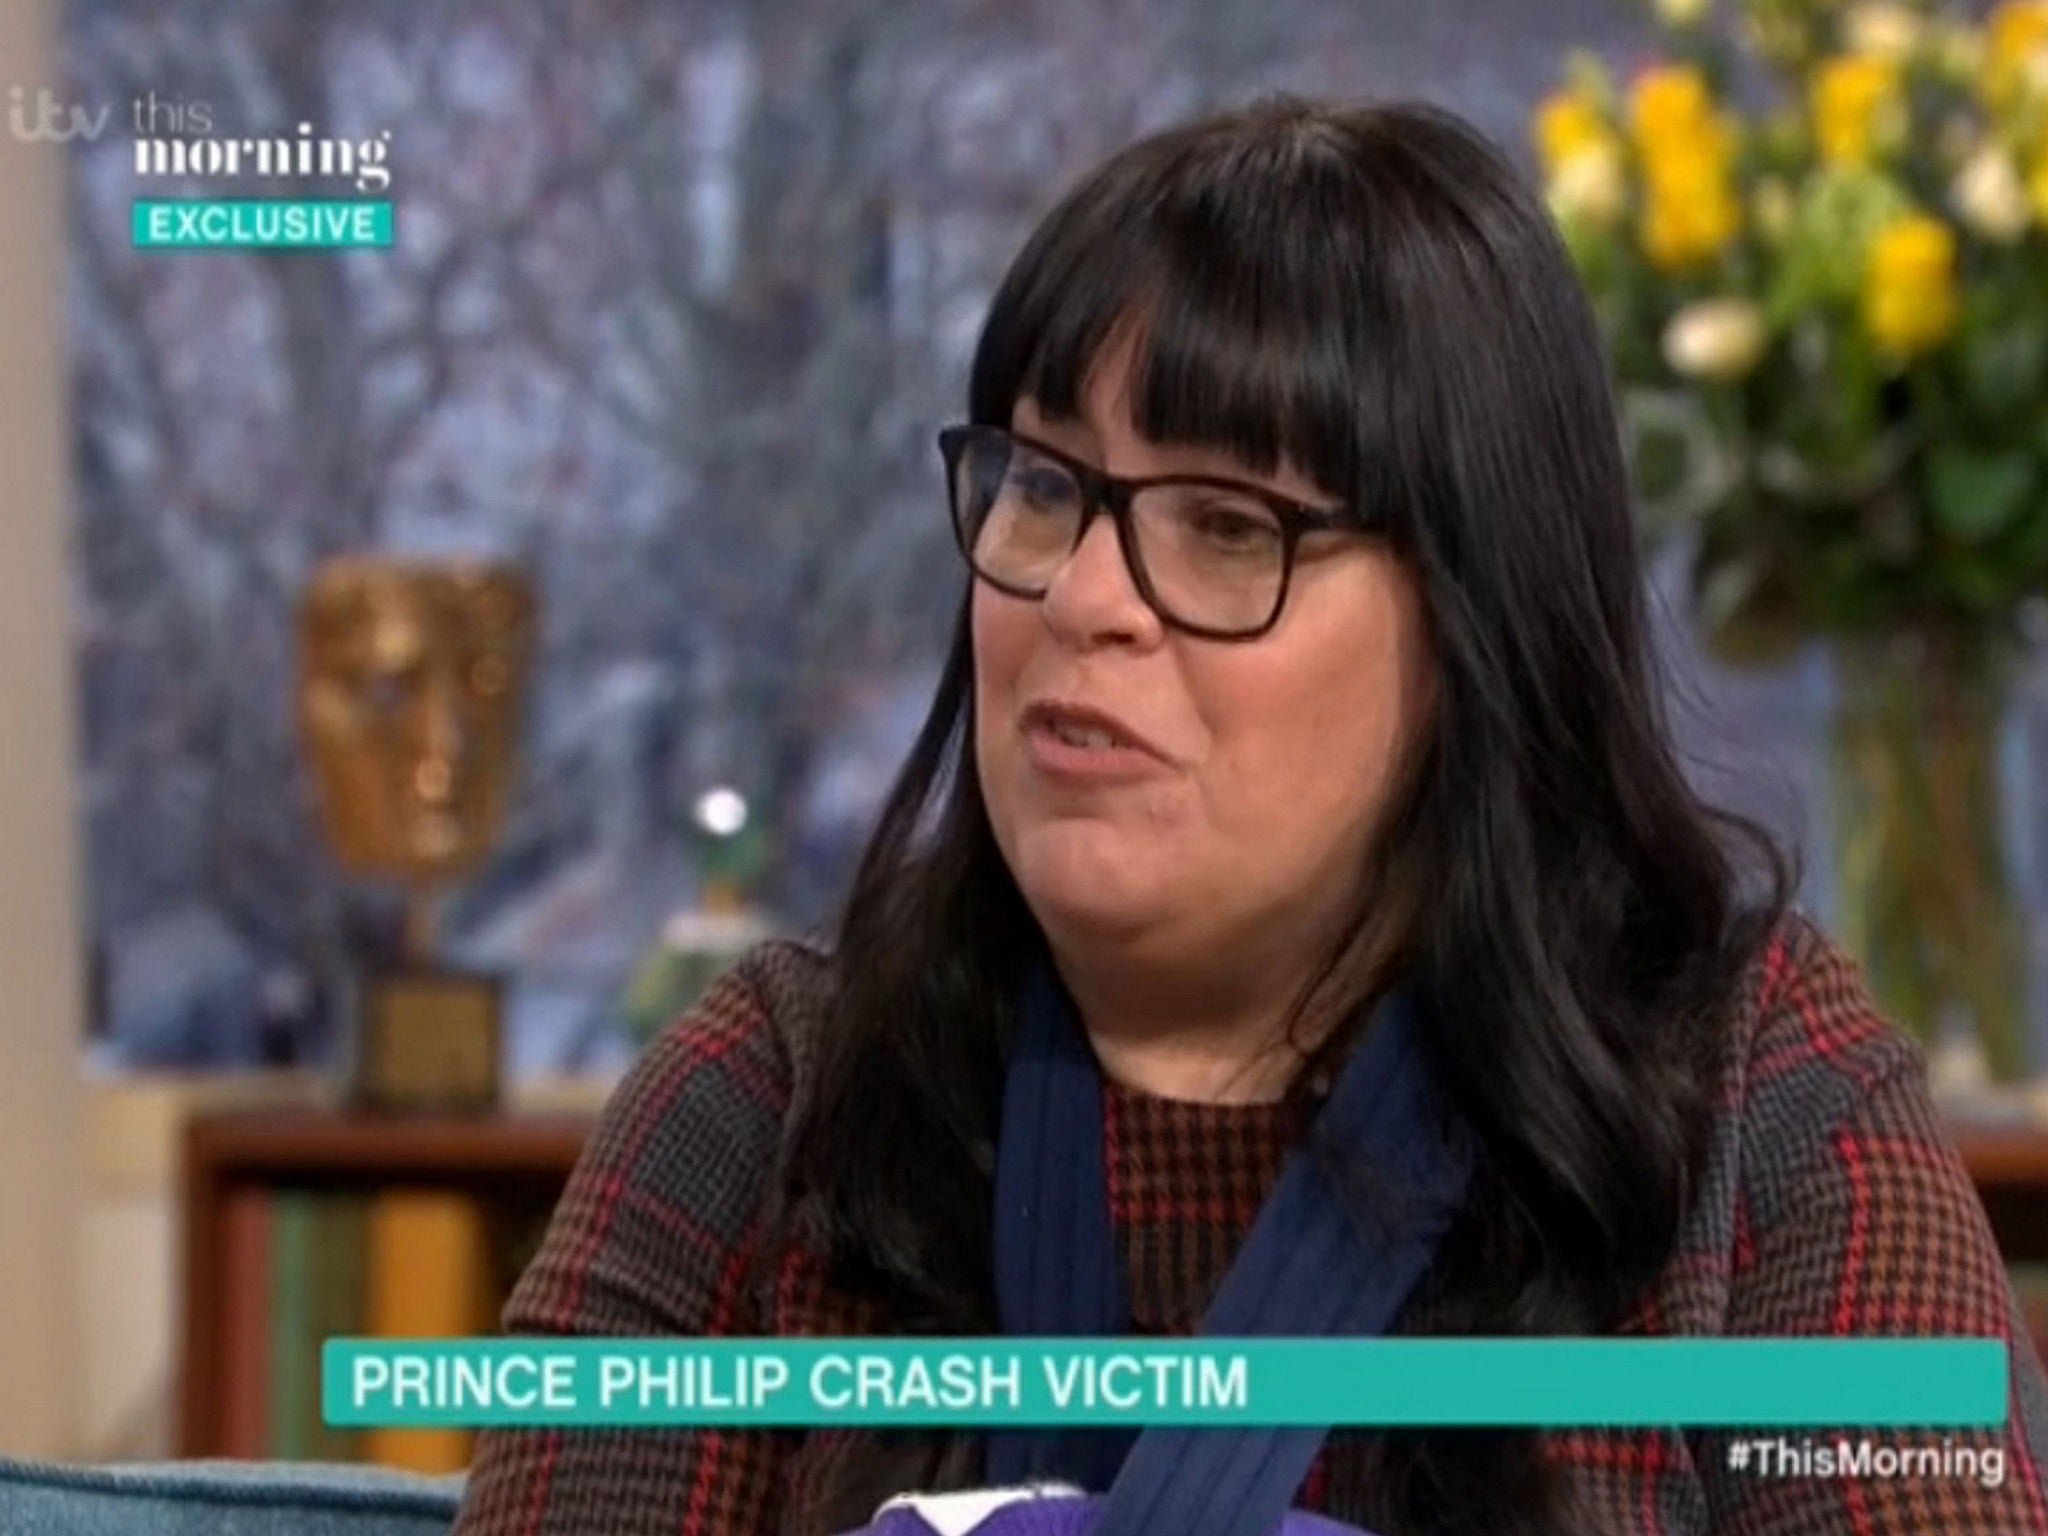 Emma Fairweather, whose wrist was broken in a car crash involving Prince Philip in Sandringham, Norfolk, on 17 January, appears on ITV's This Morning.